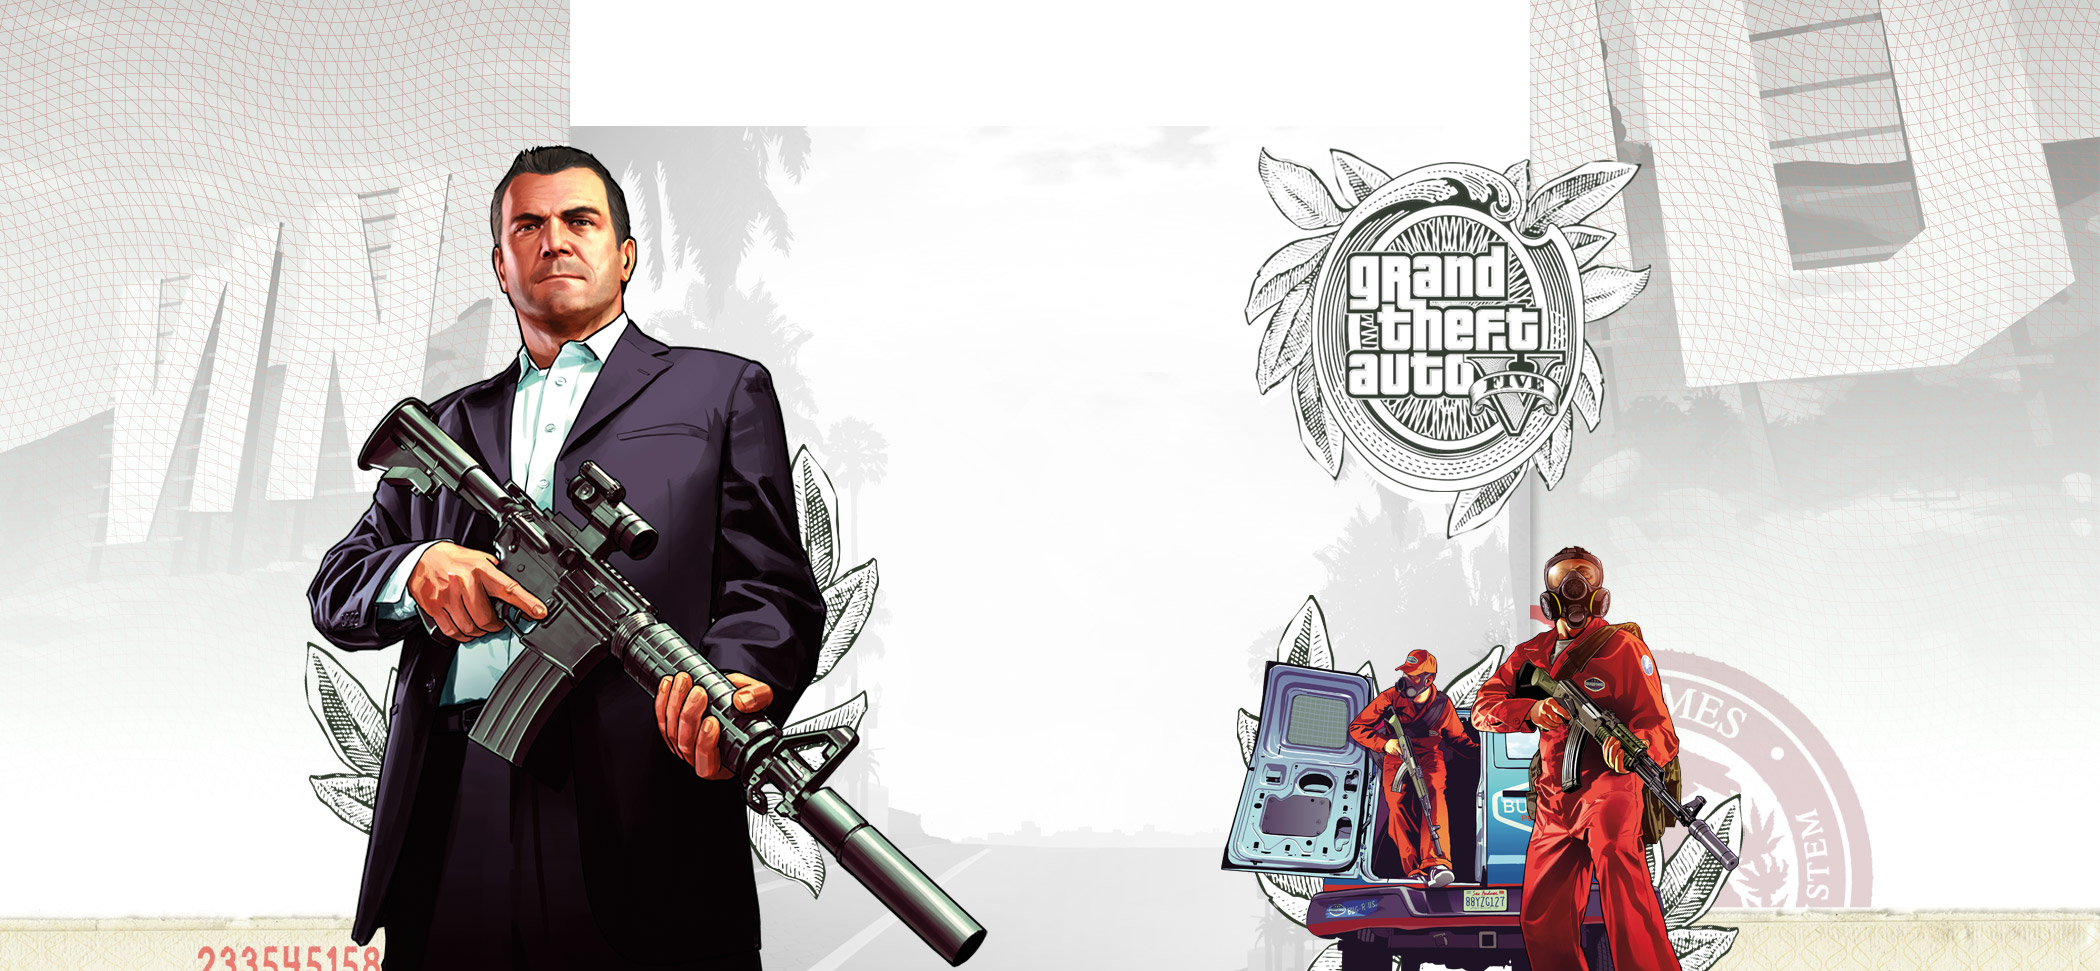 This Could Be Grand Theft Auto V's Main Man - Game Informer